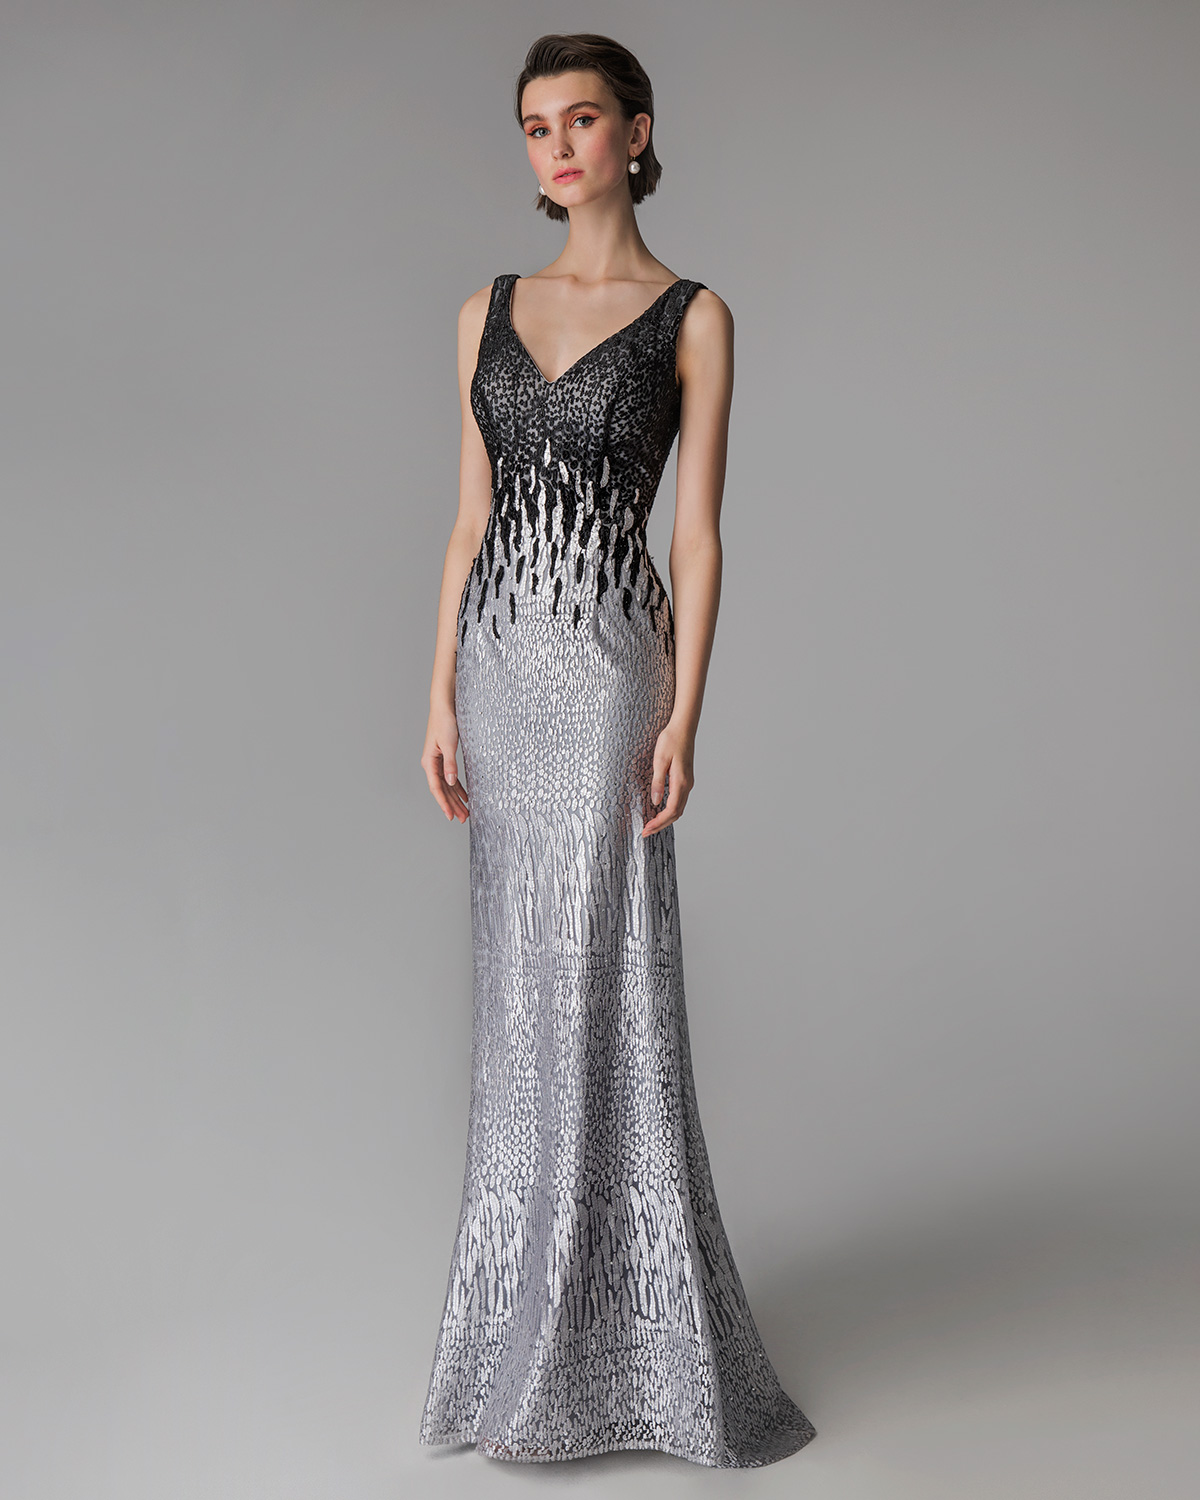 Classic Dresses / Long evening dress with lace and beading